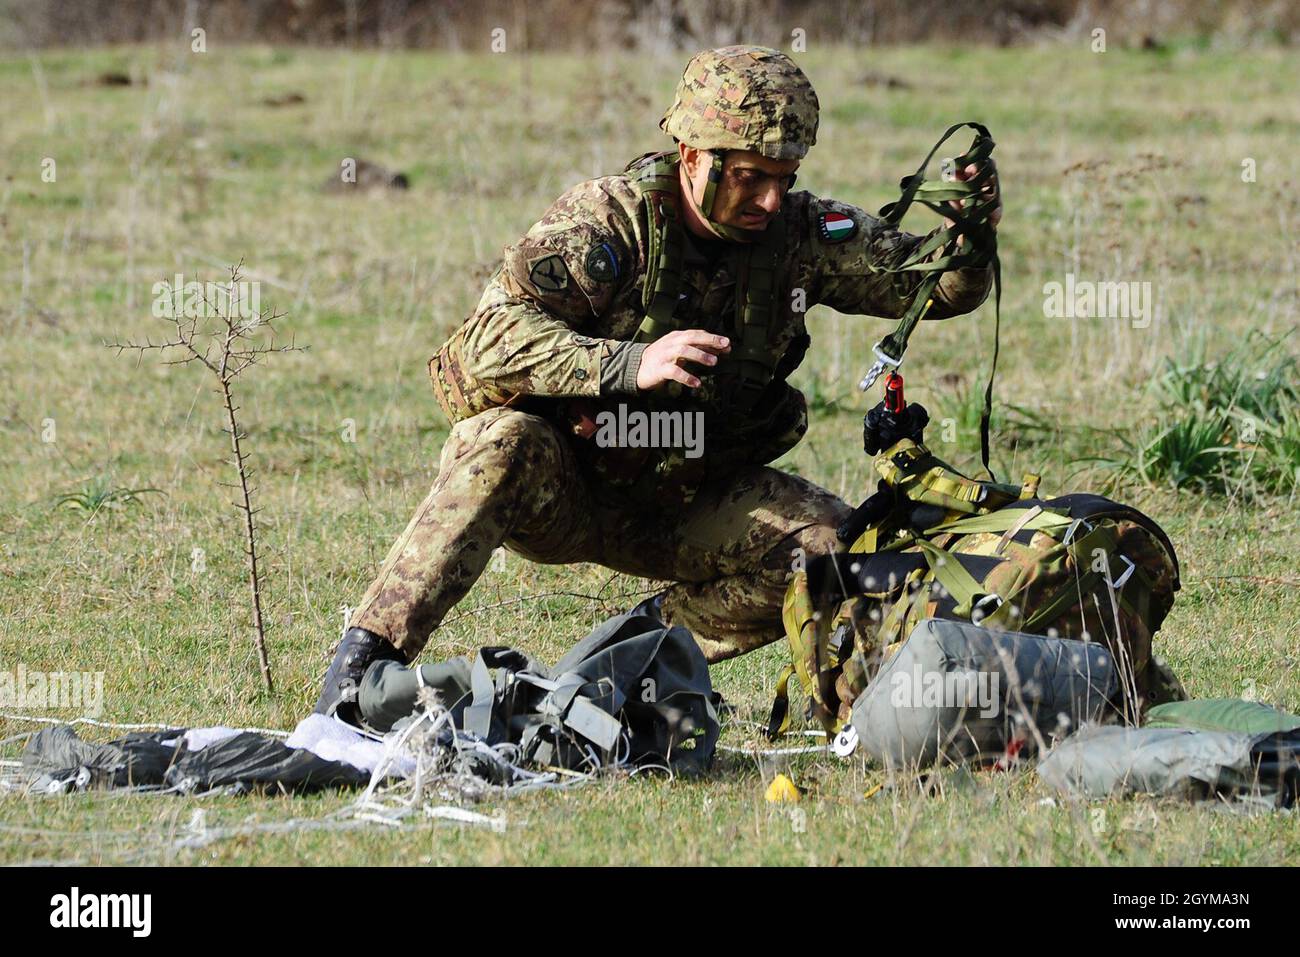 A Italian Army paratrooper from Reggimento Savoia Cavalleria 3 recovers his parachute after the airborne operation during Exercise Rock Topside 20, Monte Romano, Italy, Jan. 29, 2020.  Rock Topside 20 is a join forced entry exercise to train the battalions ability to conduct airborne contingency response force operations. This training stresses the interoperability of both the paratroopers of the 2nd Battalion, 503rd Infantry Regiment and Italian paratroopers Reggimento Savoia Cavalleria 3. (U.S Army photo by Elena Baladelli) Stock Photo